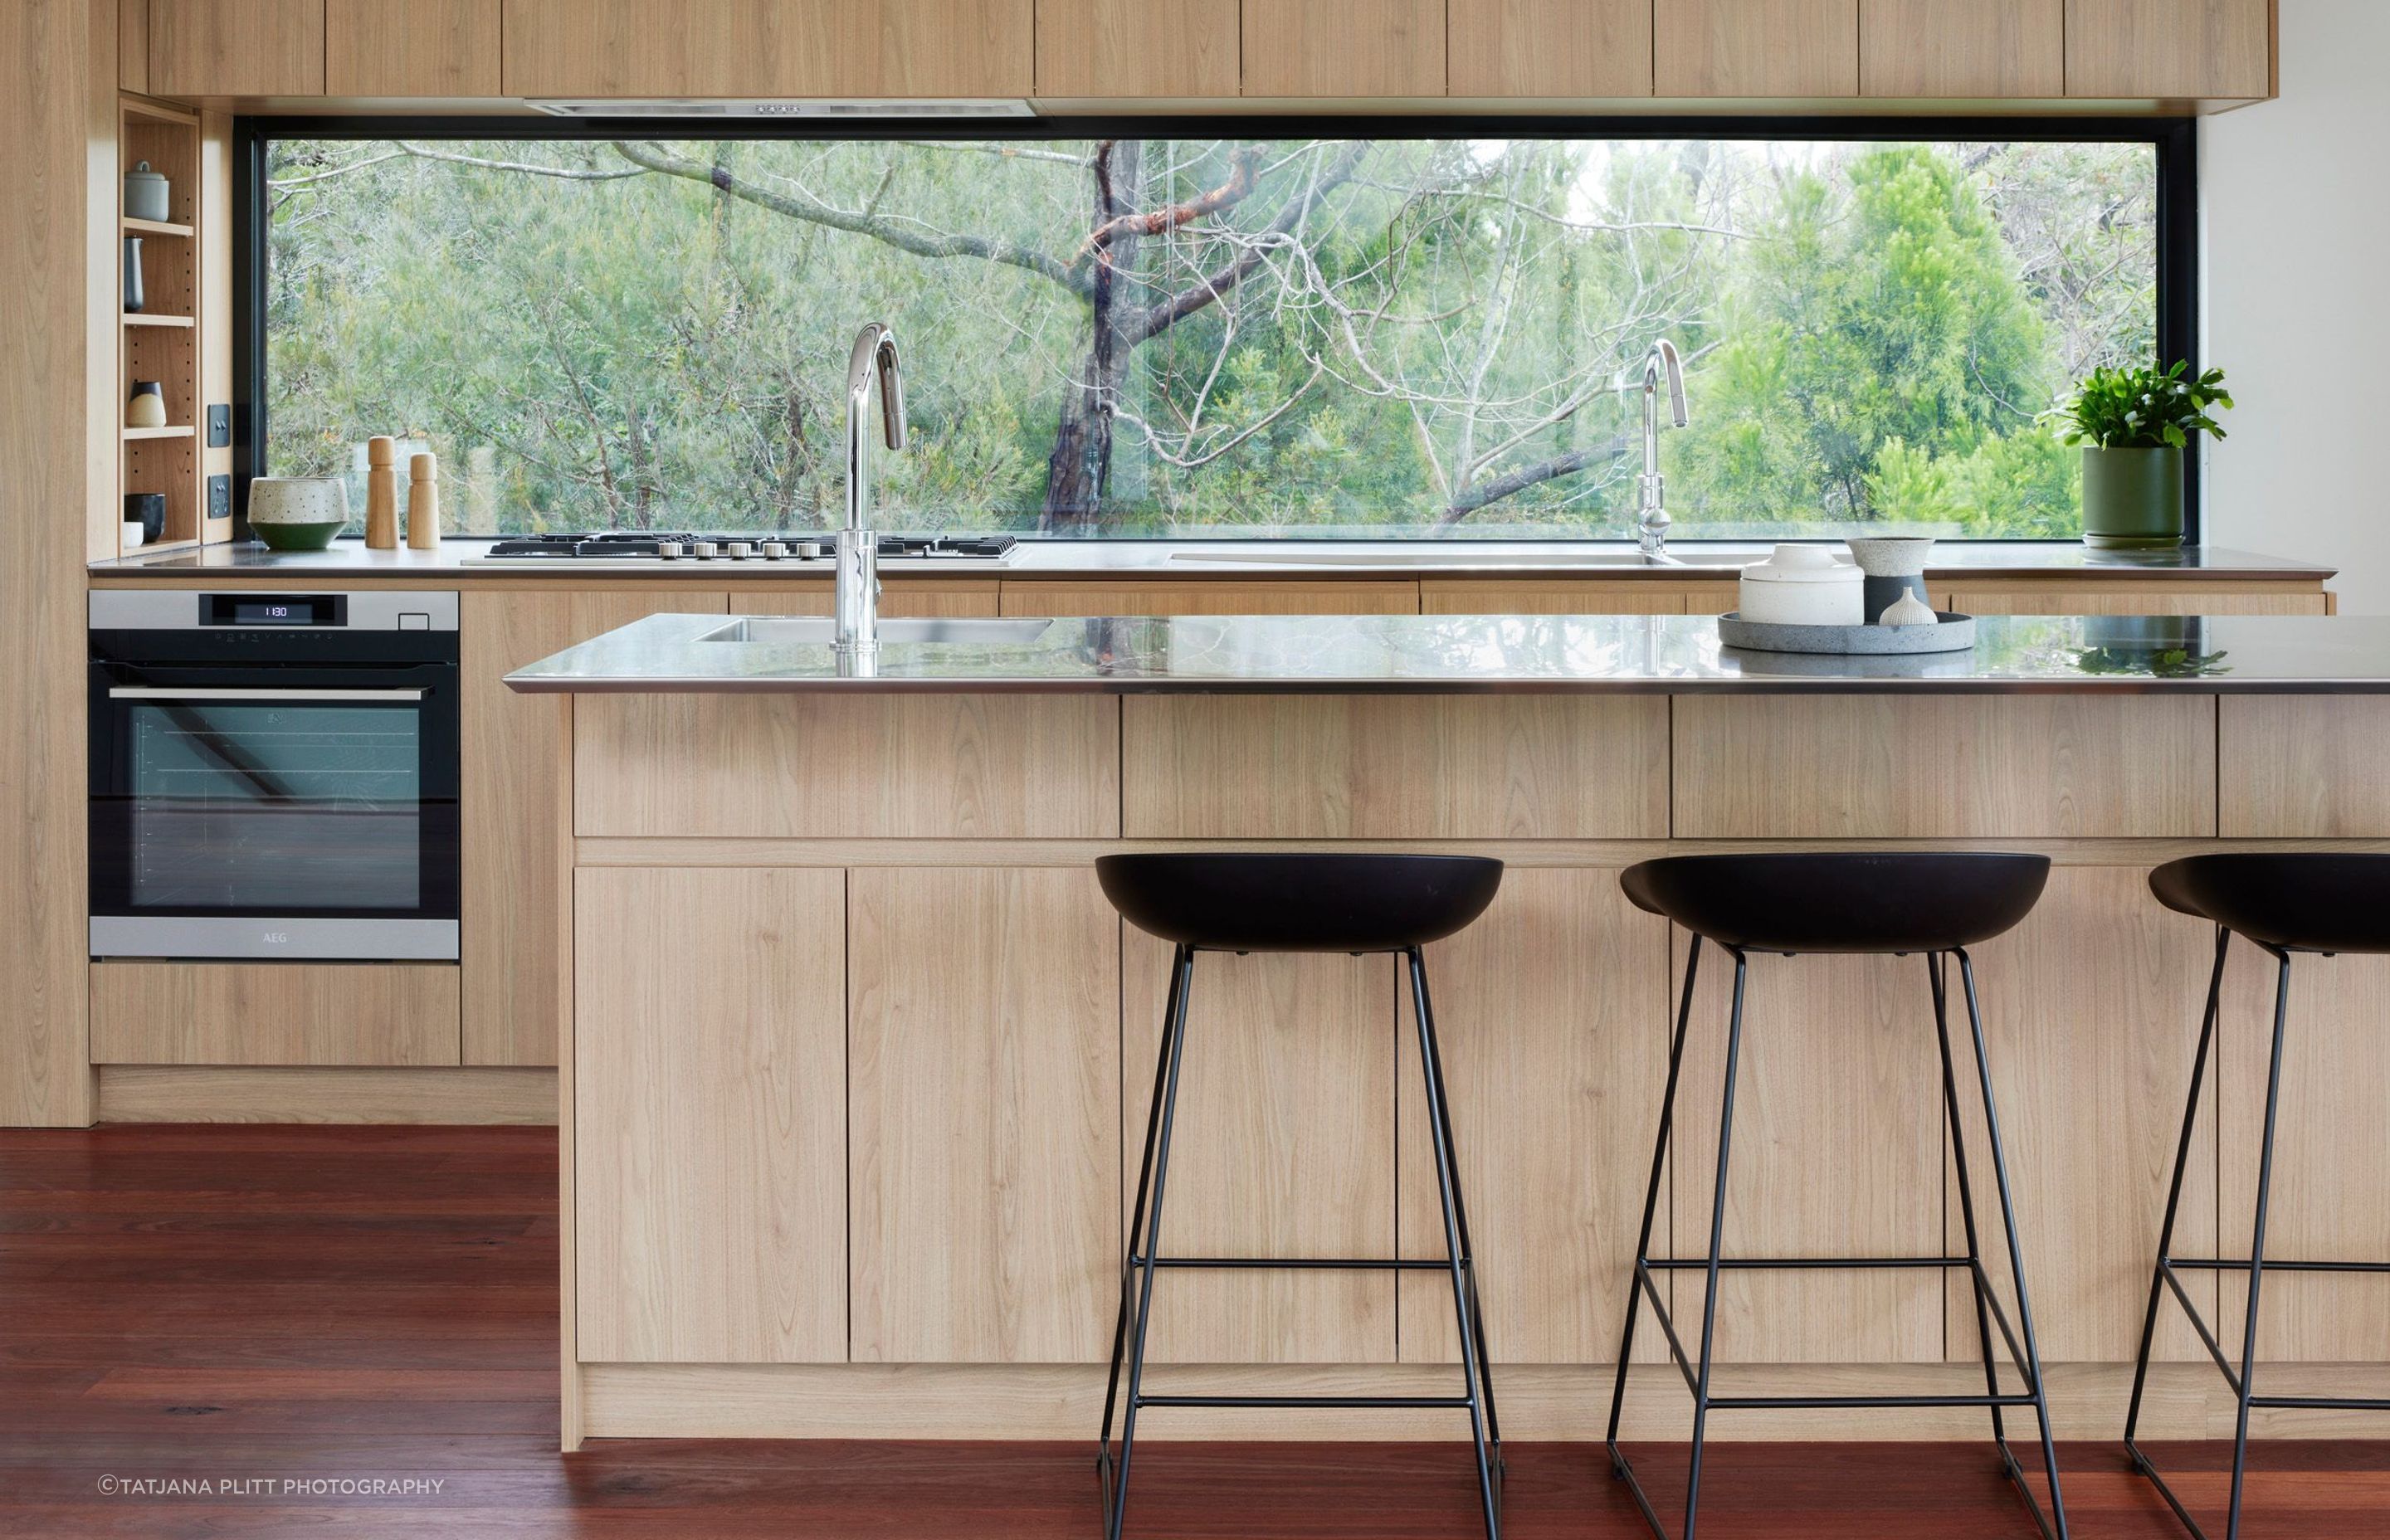 A window has been chosen as the kitchen splashback to maximise natural light and the beautiful view.